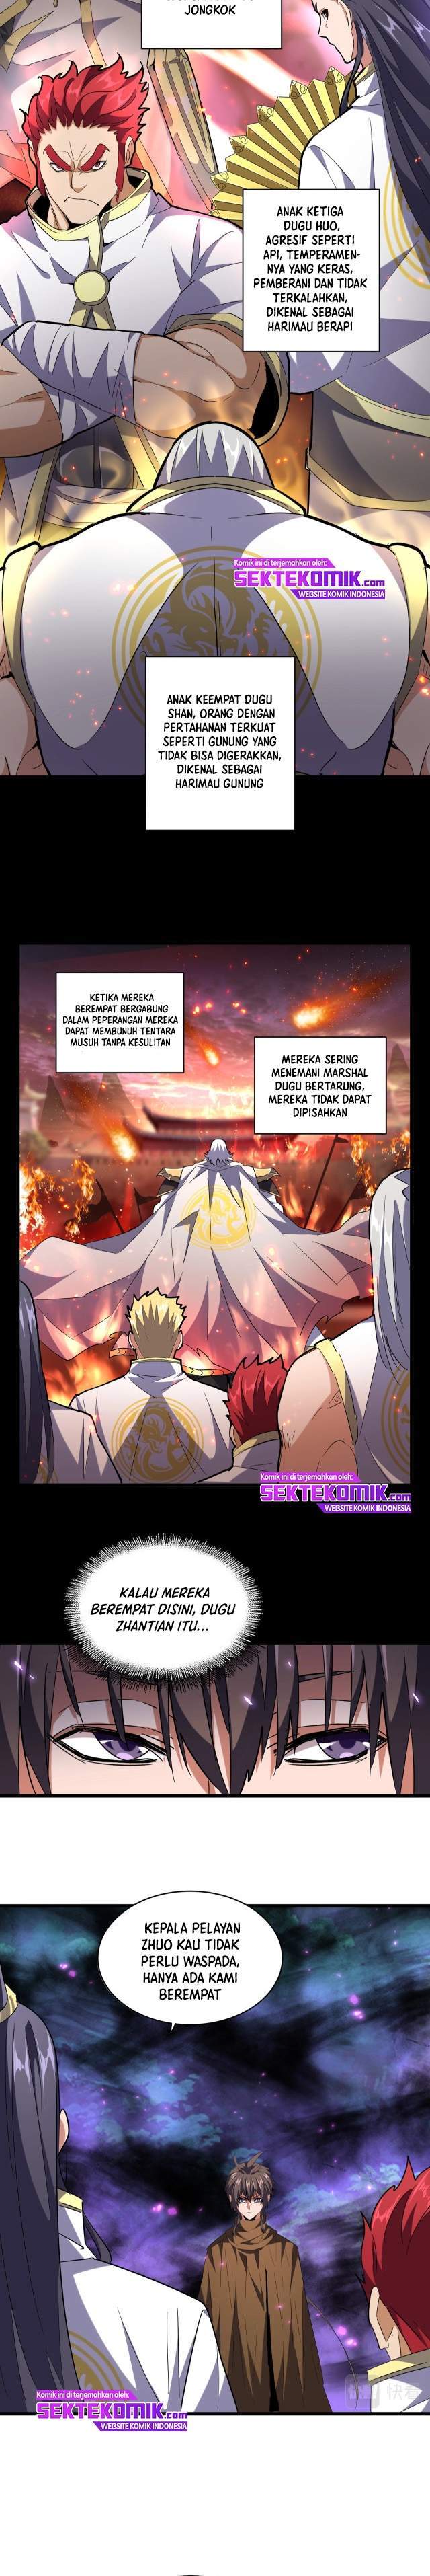 Magic Emperor Chapter 231 Image 8